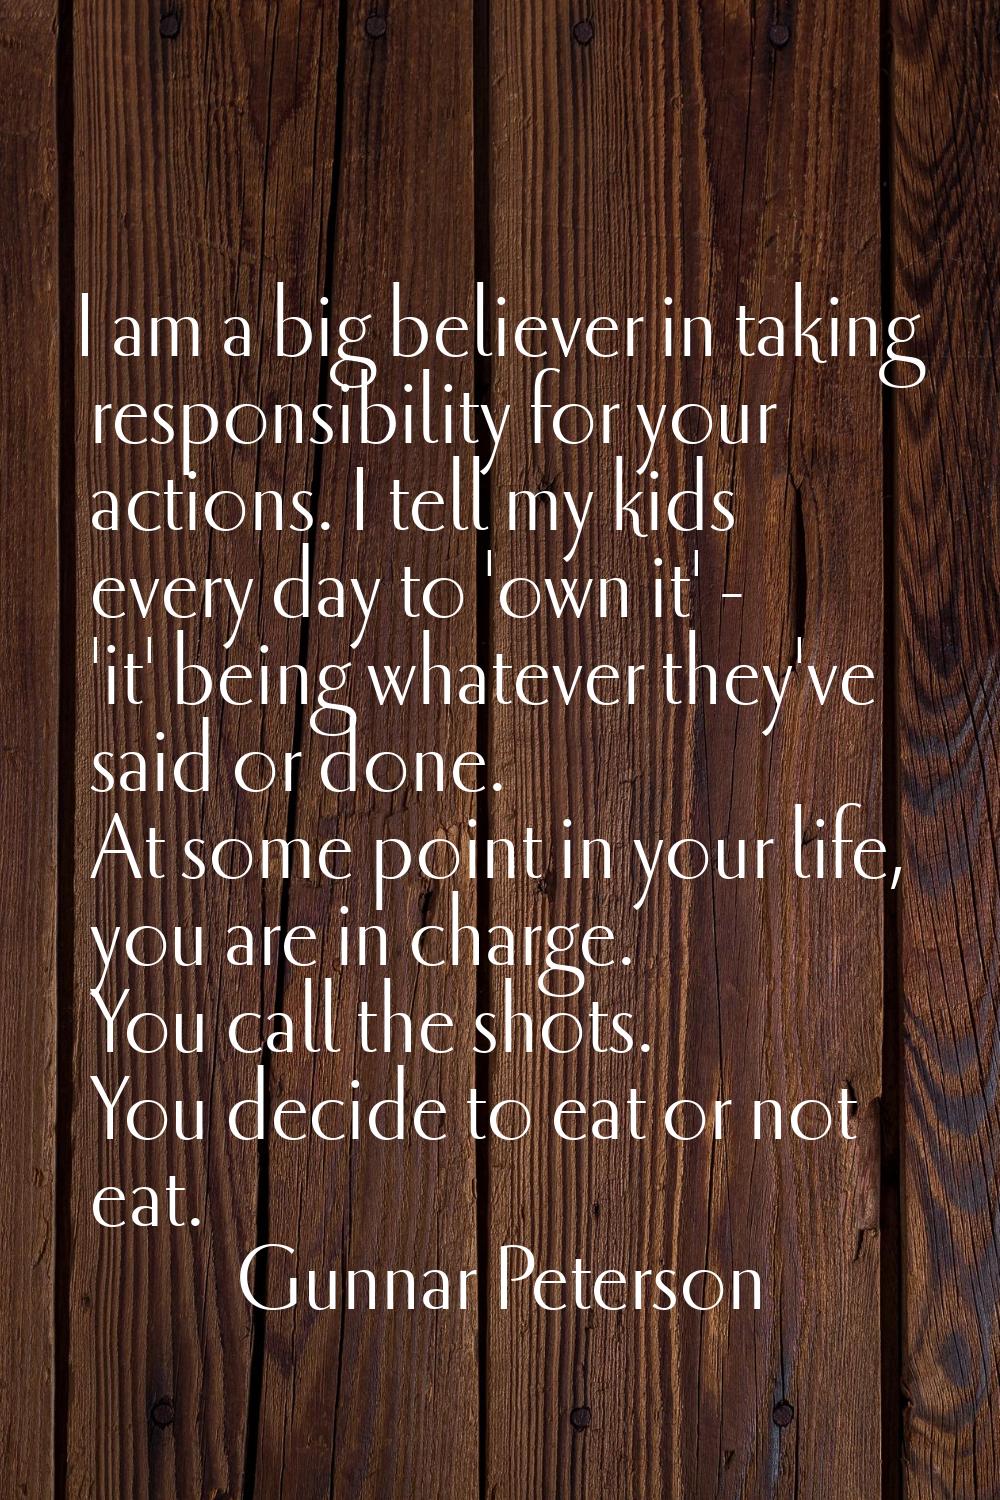 I am a big believer in taking responsibility for your actions. I tell my kids every day to 'own it'